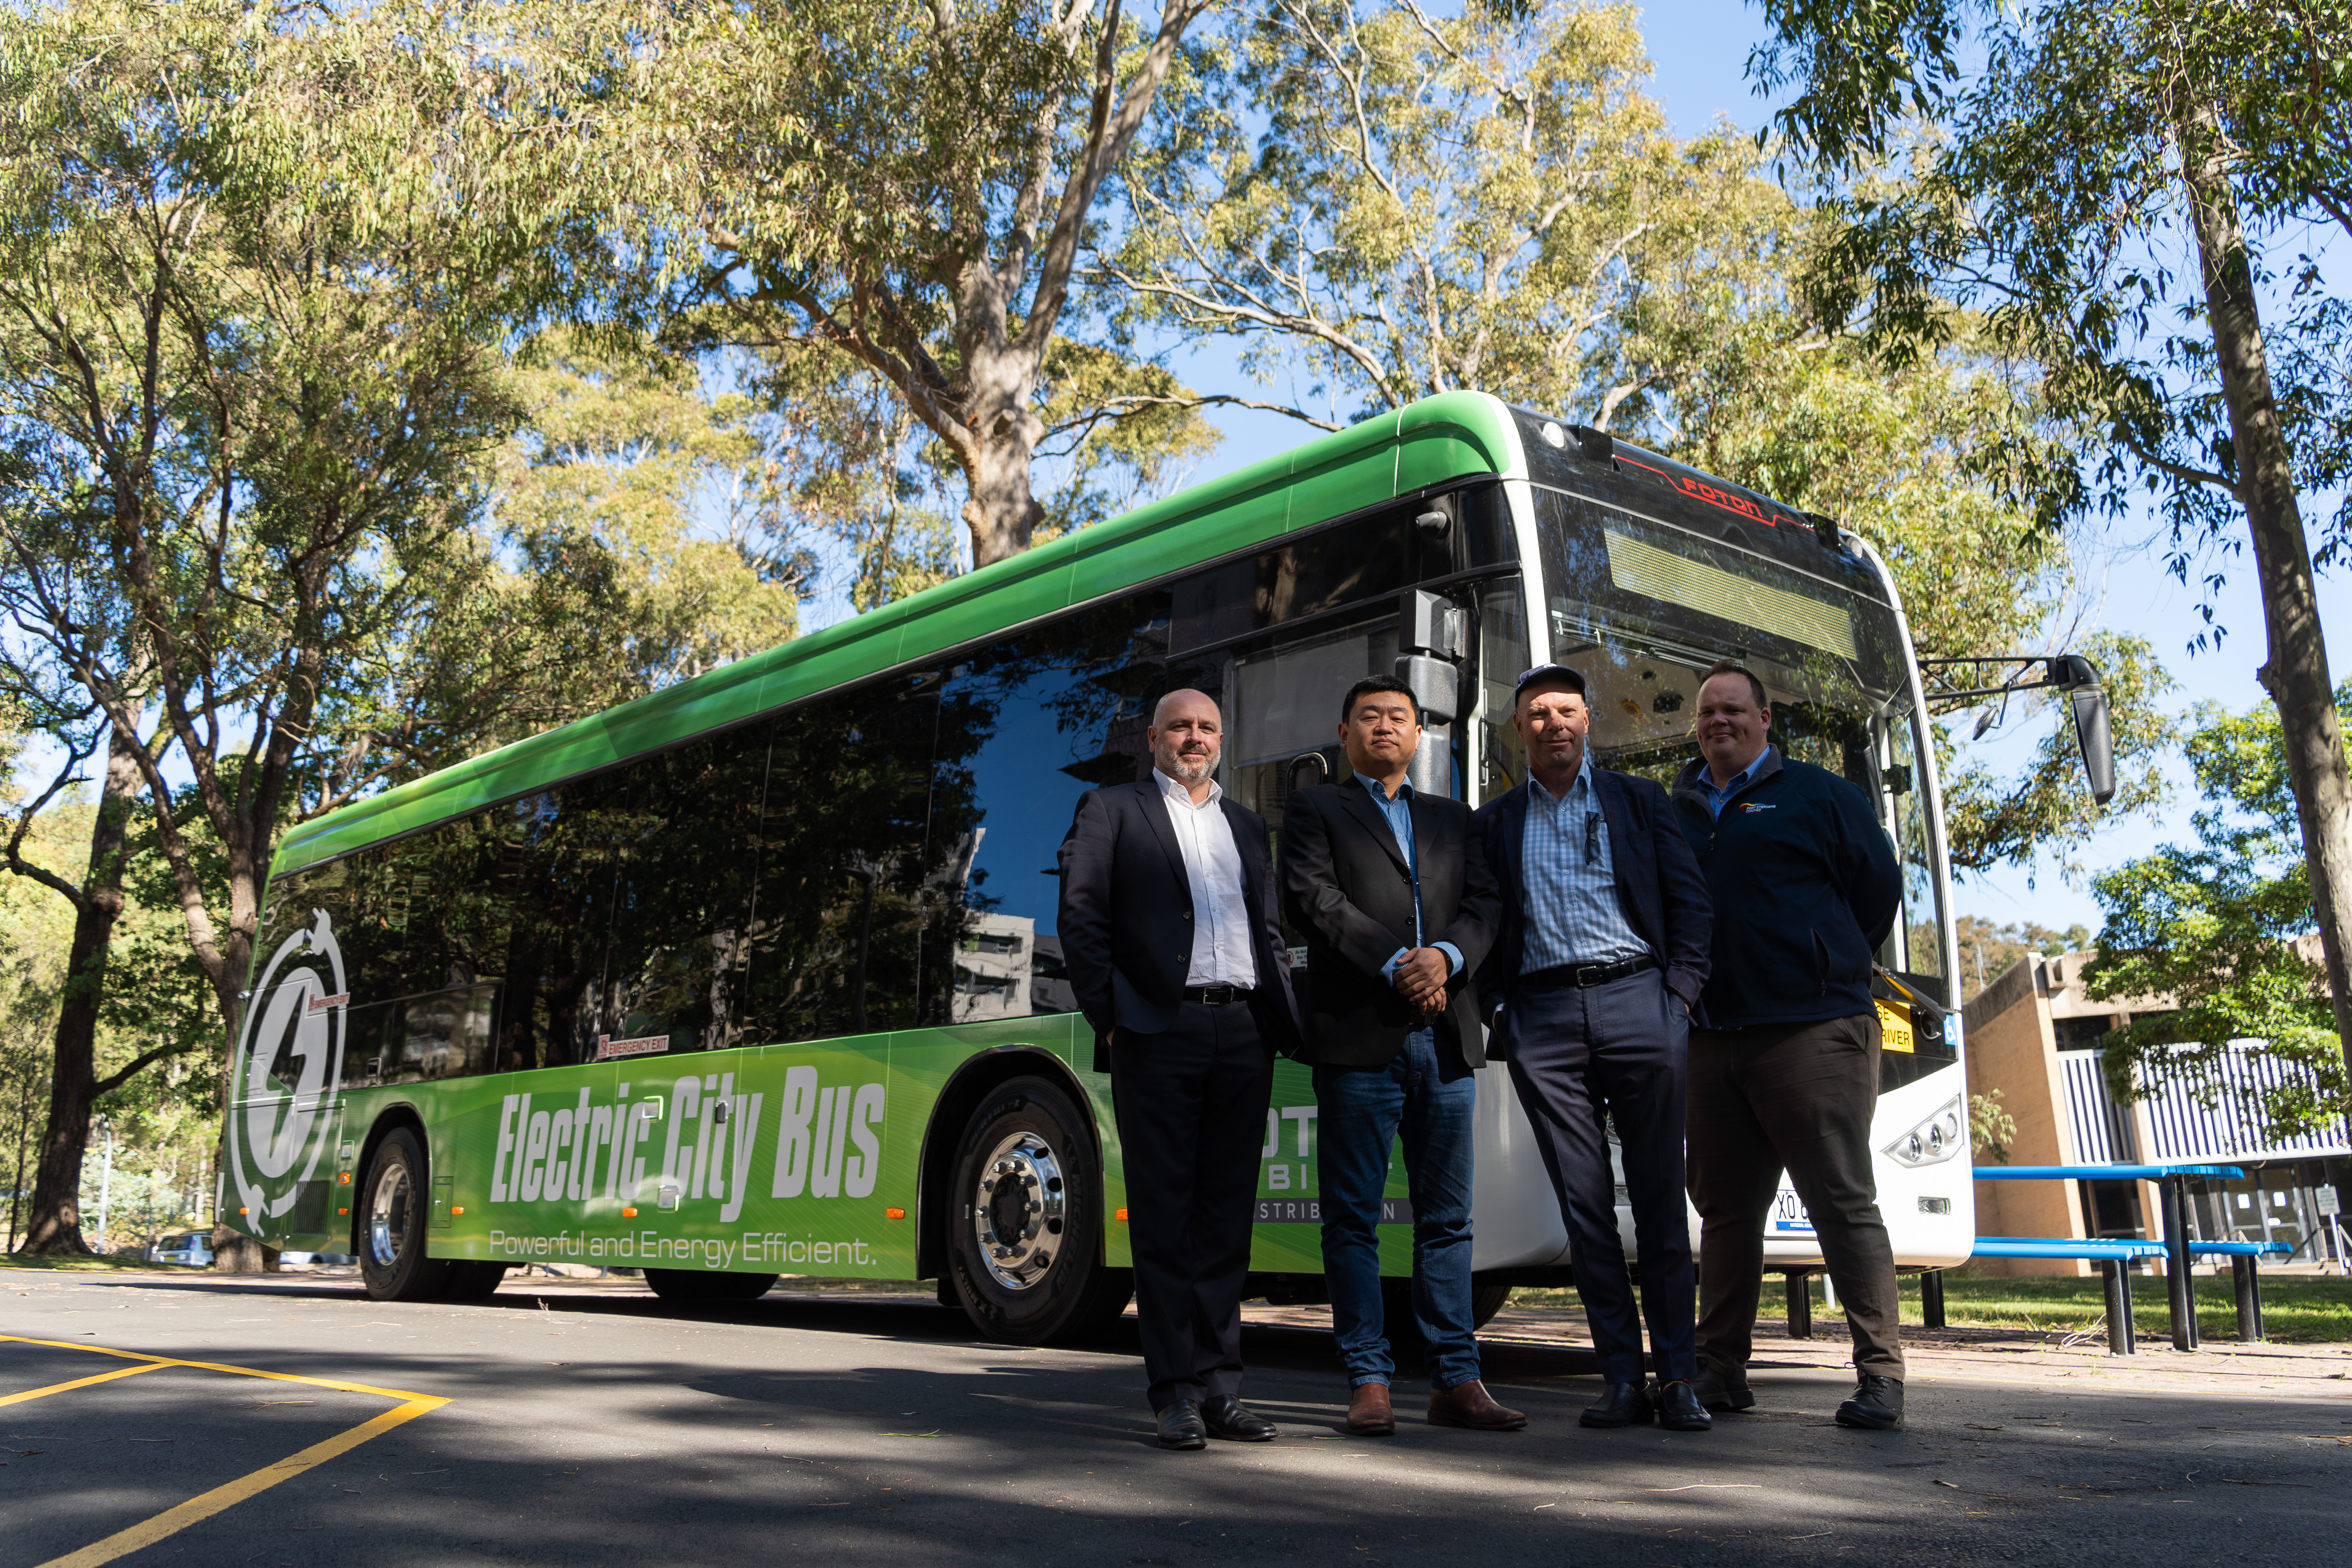 L-R - Stephen Johnston Director IFS, Neil Wang - CEO Fonton Mobility Distribution, Warwick Dawson PVC Industry & Engagement, Simon Gayler Port Stephens Coaches Operations Manager 